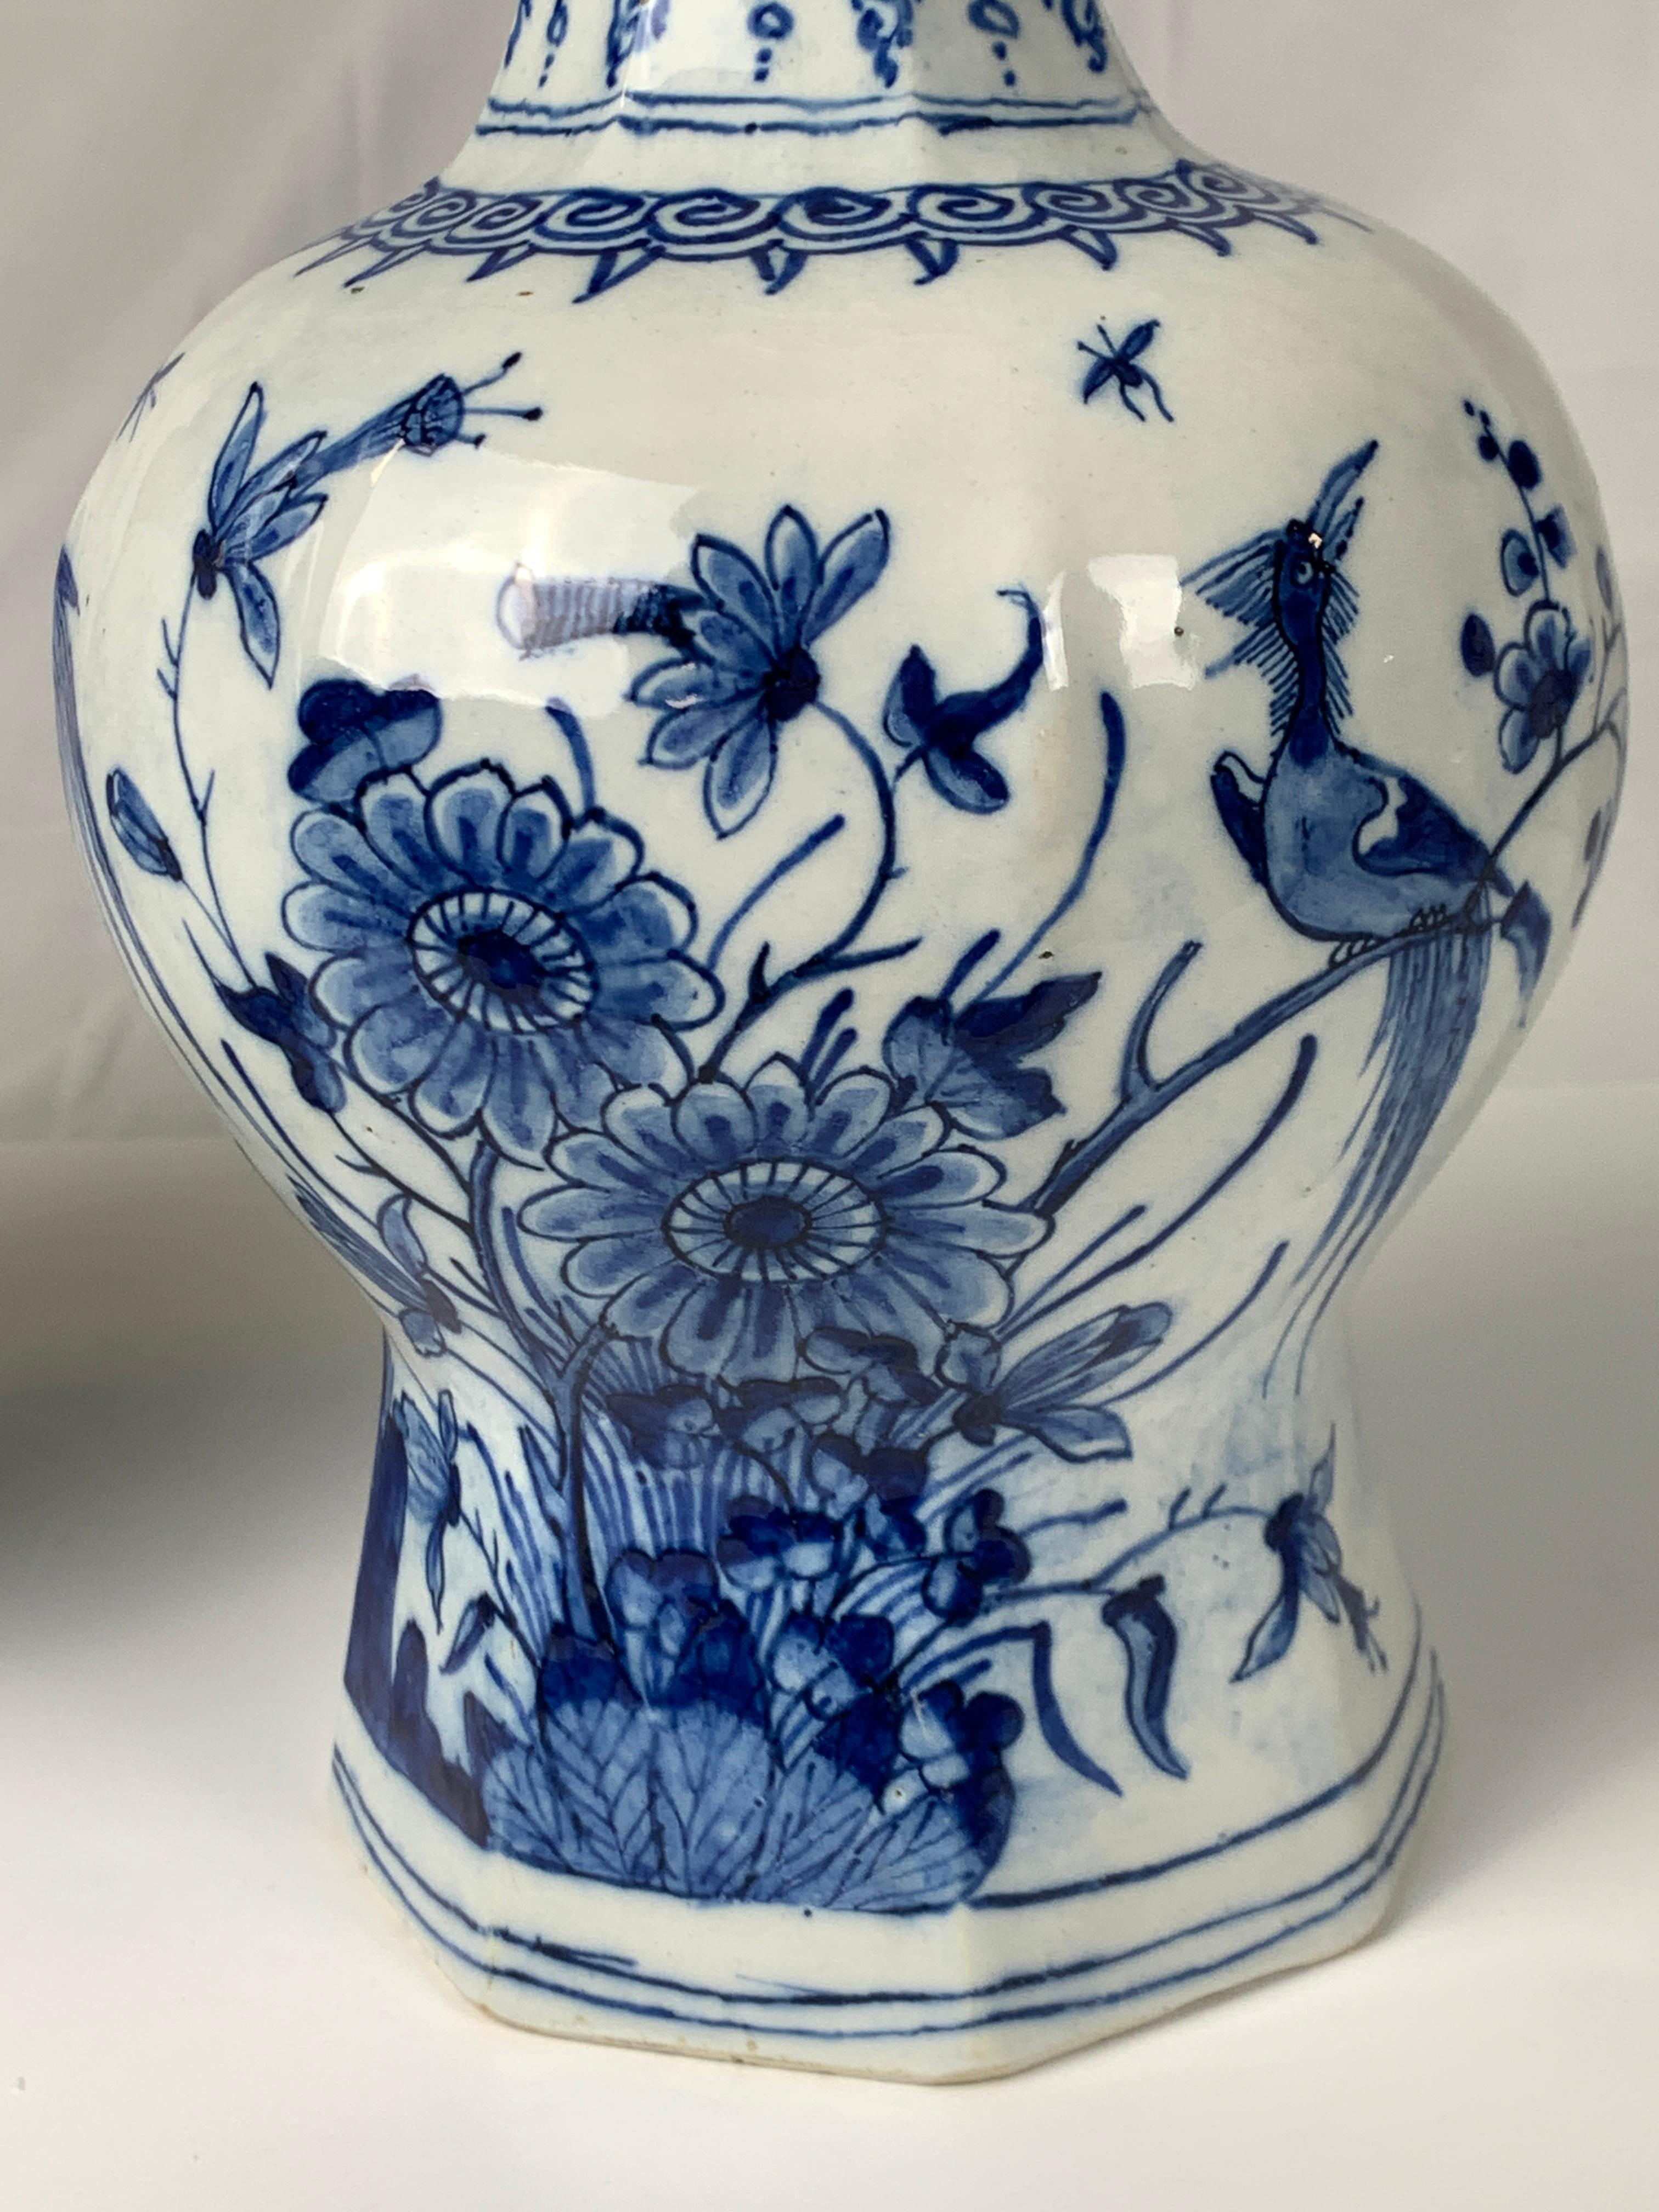 We are pleased to offer this exquisite pair of blue and white Dutch Delft vases hand-painted in shades of cobalt blue with a scene of songbirds on a rocky outcropping surrounded by flowering trees, butterflies, and a garden fence. The design is